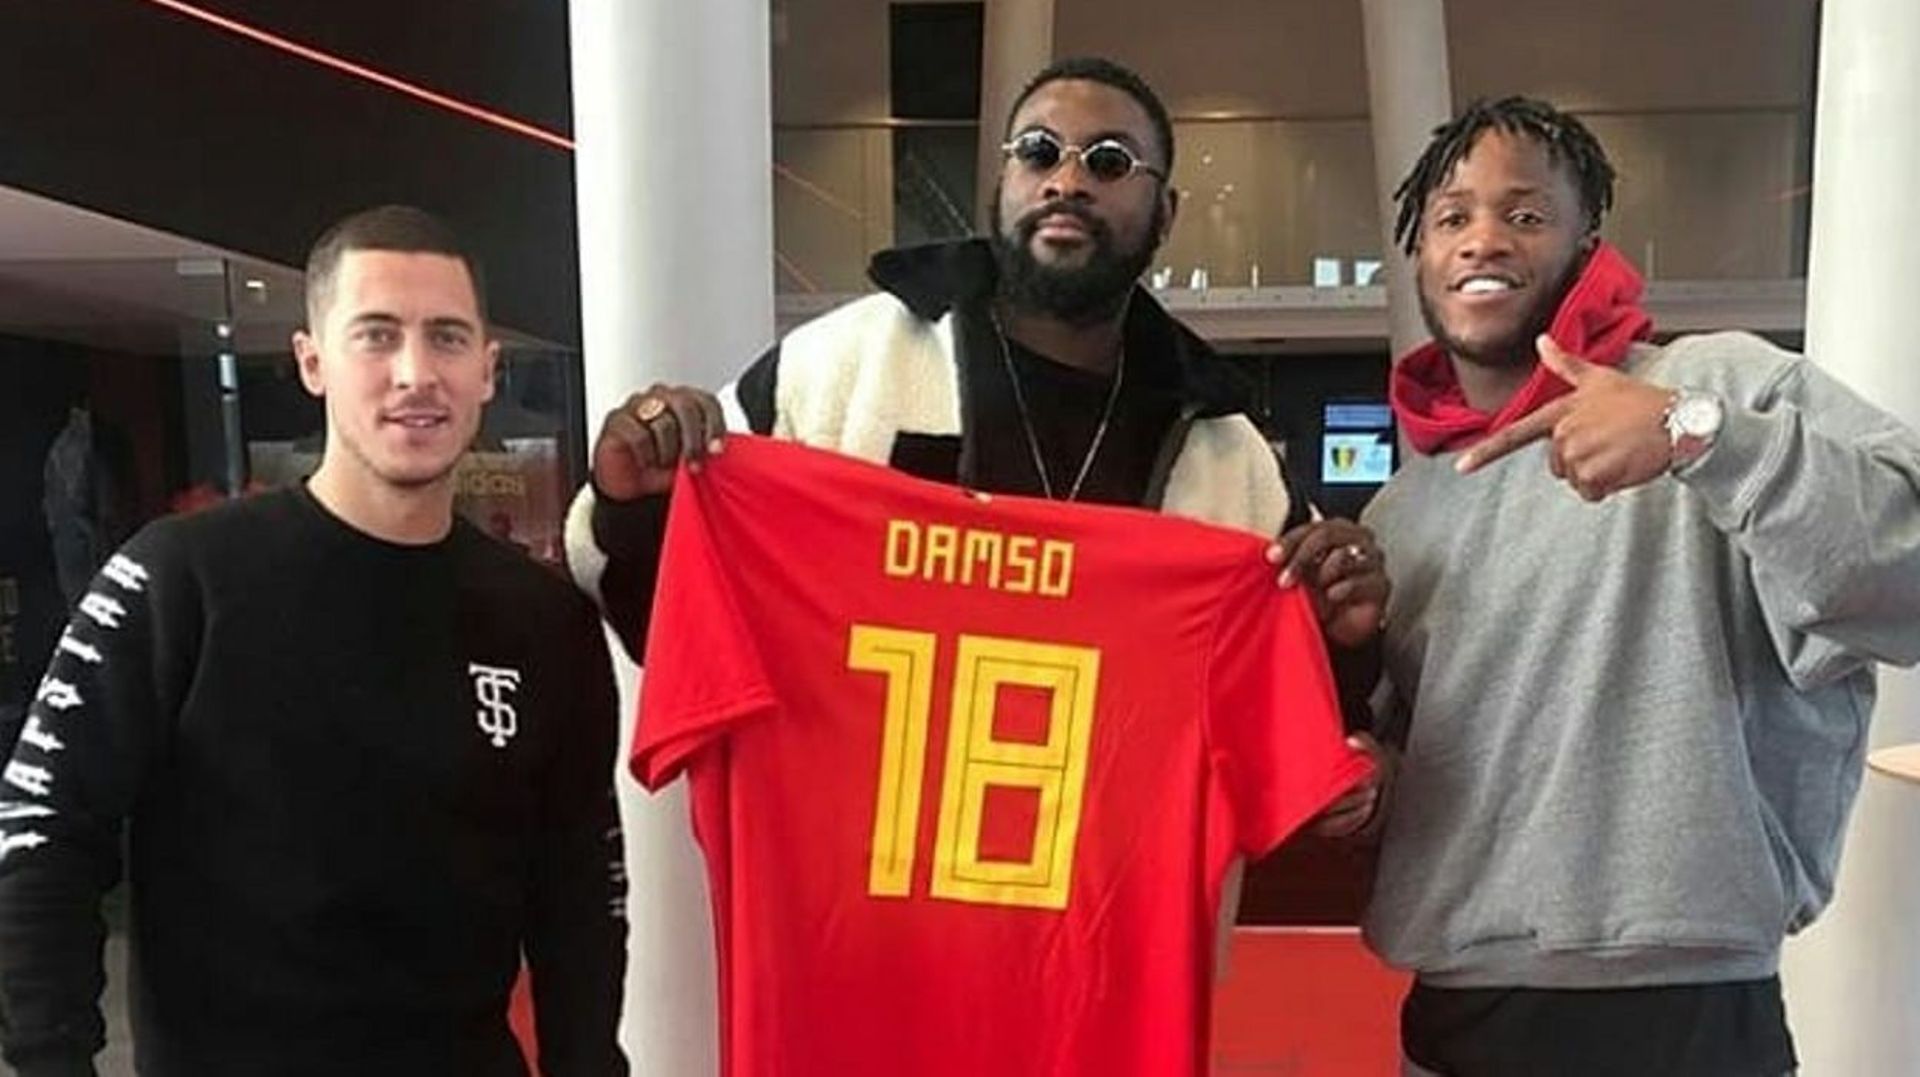 Damso : l'interview exclusive - RTBF Info 